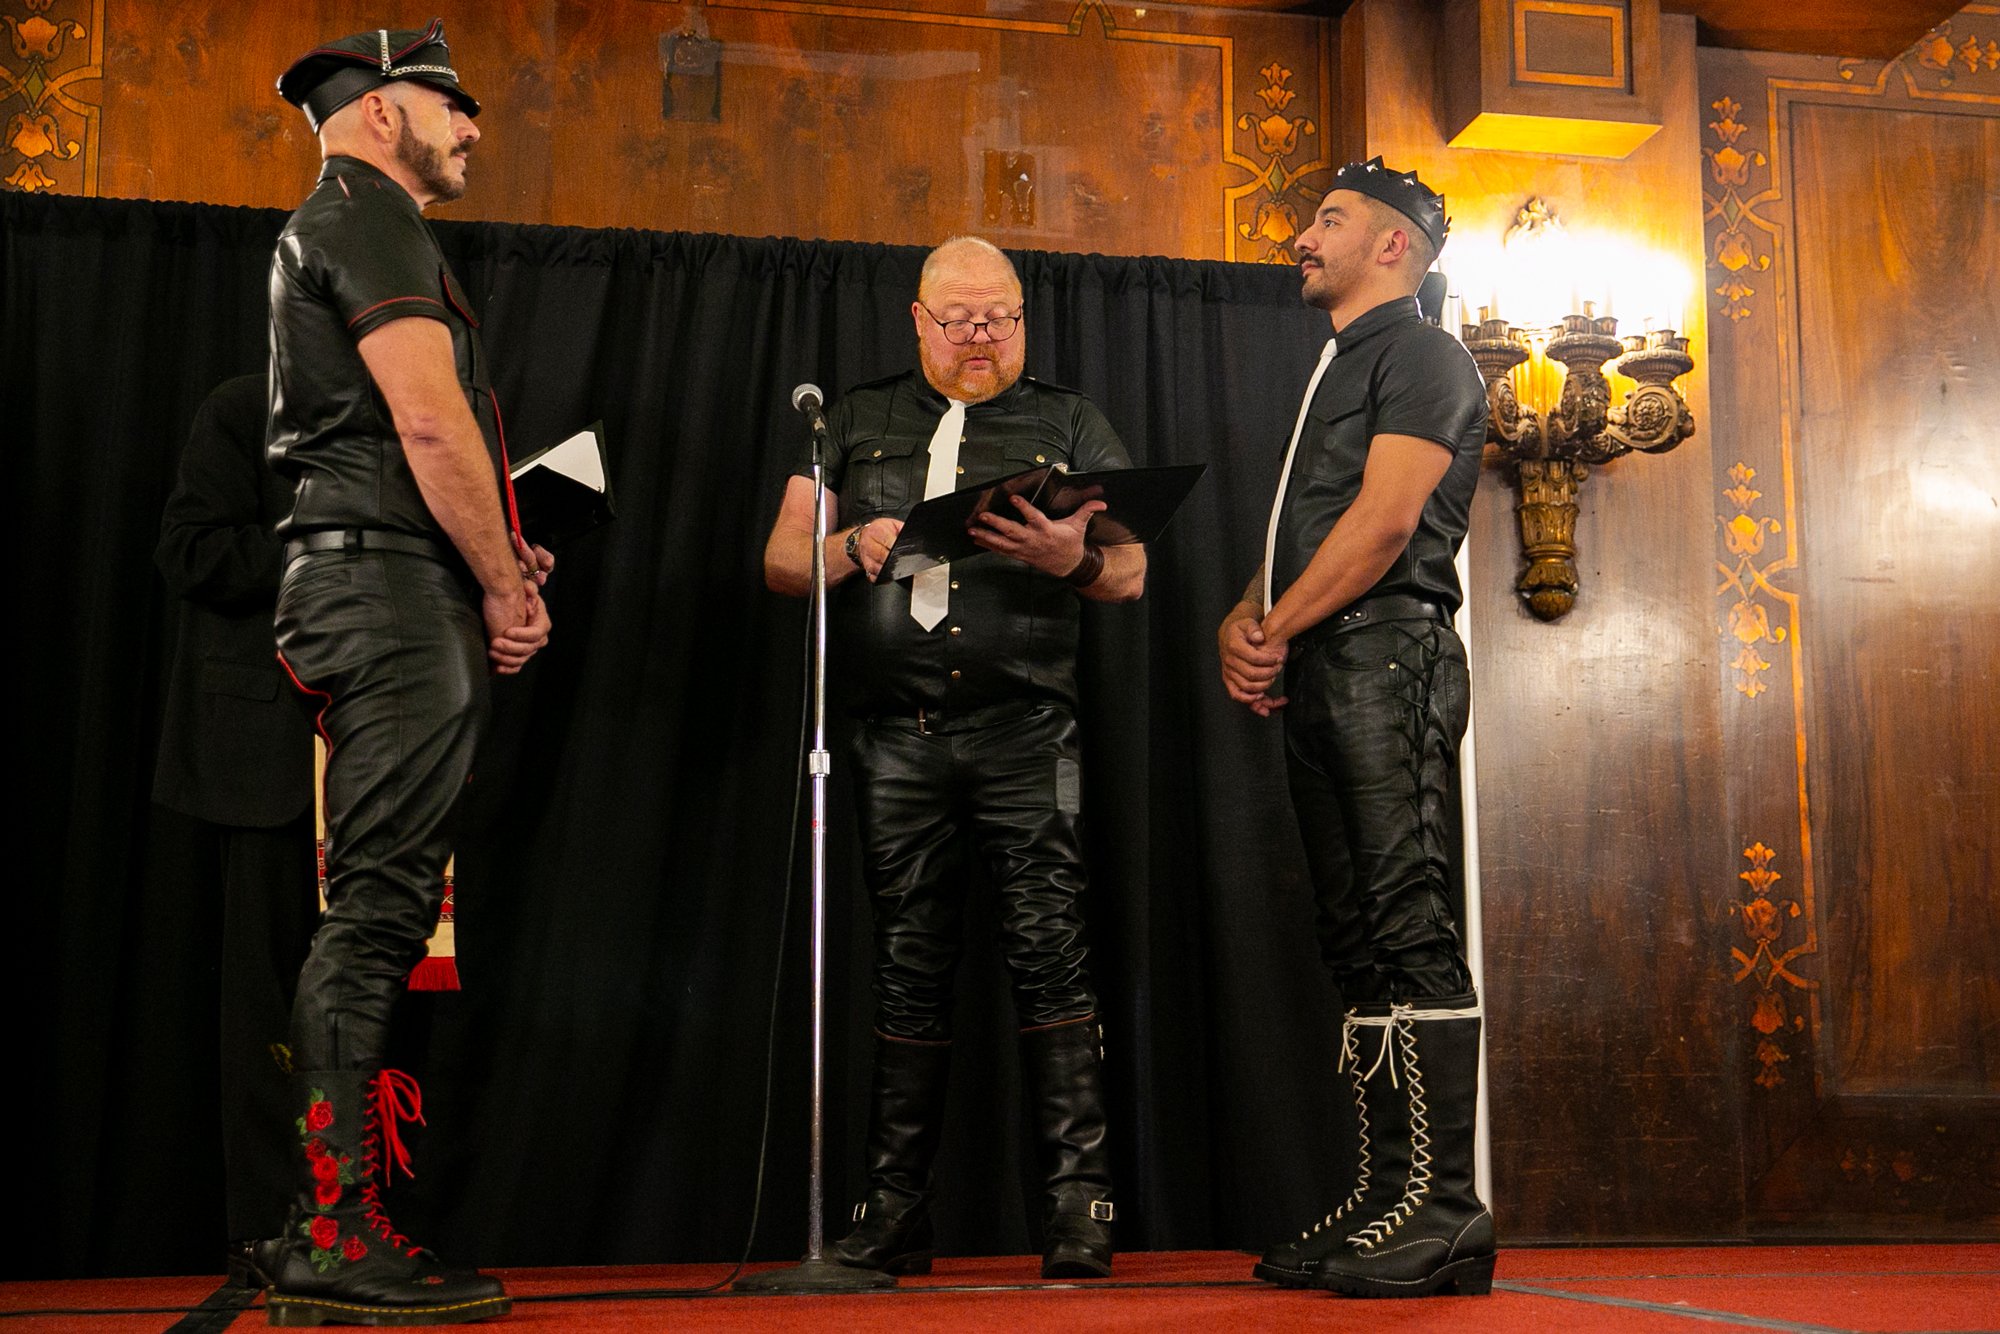  Sam, left and Oscar, right, are married in The Florentine Room during International Mister Leather 45, held at The Auditorium Theater, Saturday May 27, 2023, Chicago, IL.   The couple chose to be married at the event, surrounded by friends from thei